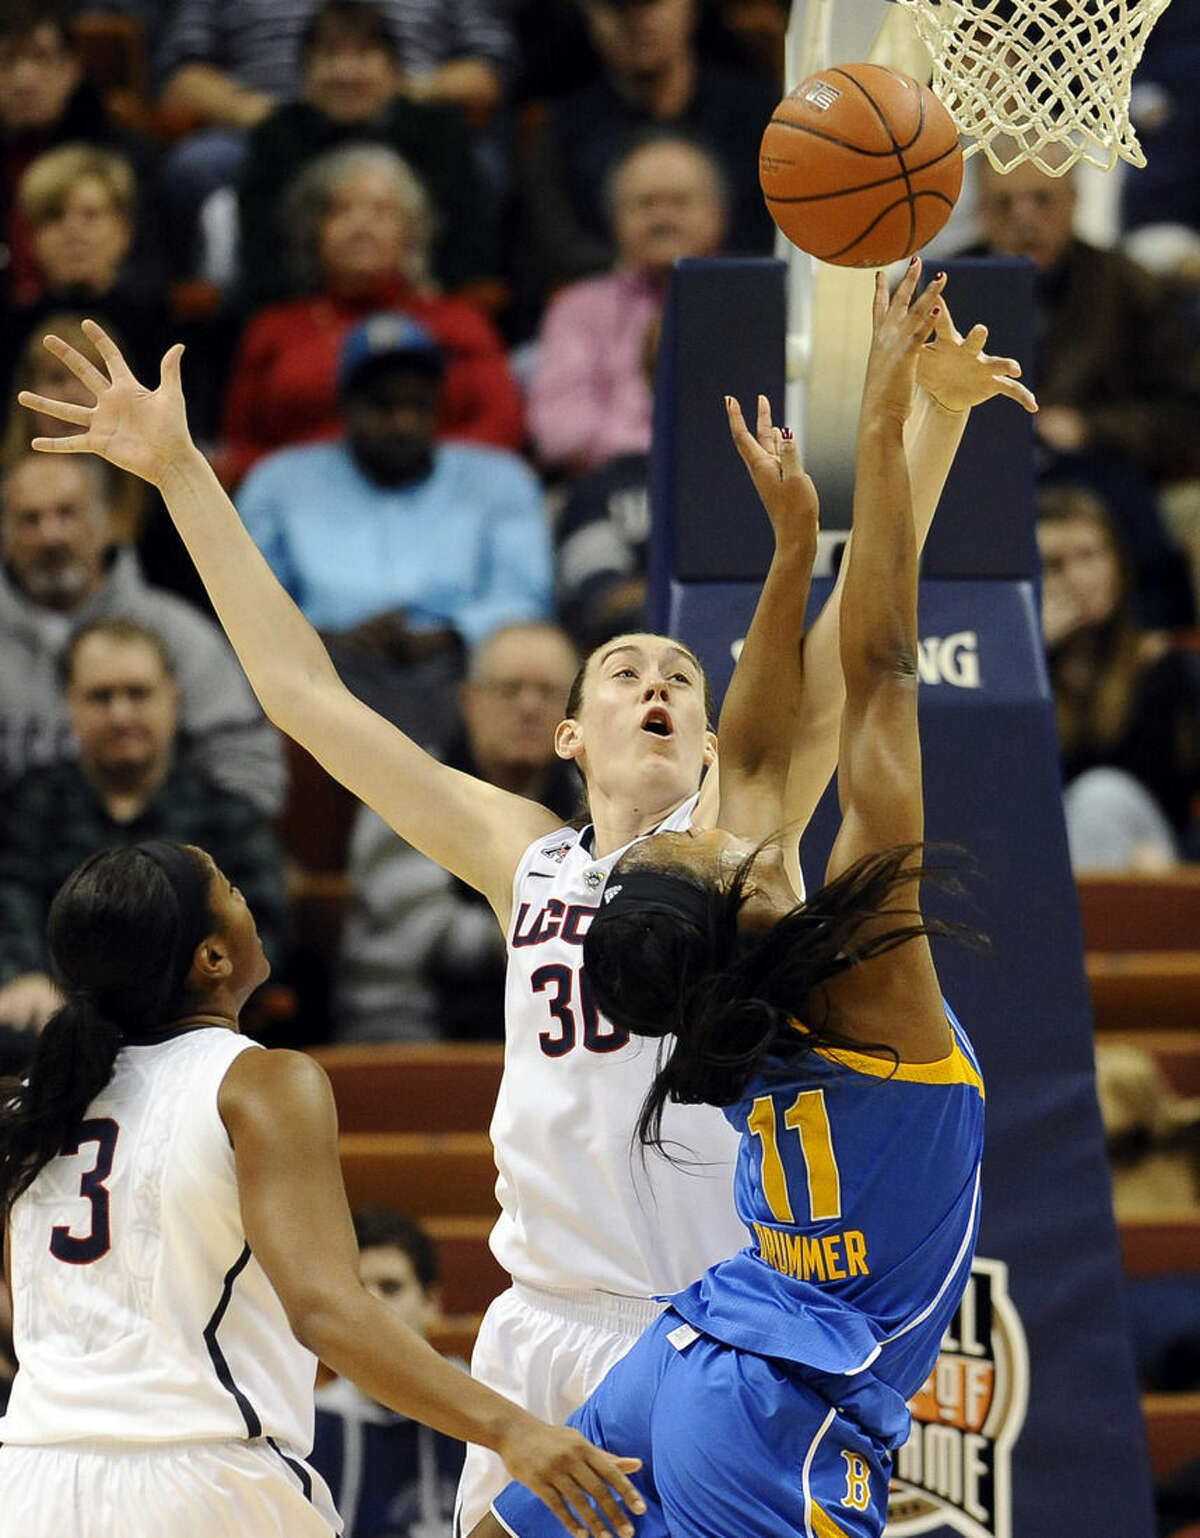 Connecticut’s Breanna Stewart, left, blocks a shot attempt by UCLA’s Lajahna Drummer, right, during the first half of an NCAA college basketball game, Sunday, Dec. 21, 2014, in Uncasville, Conn. (AP Photo/Jessica Hill)